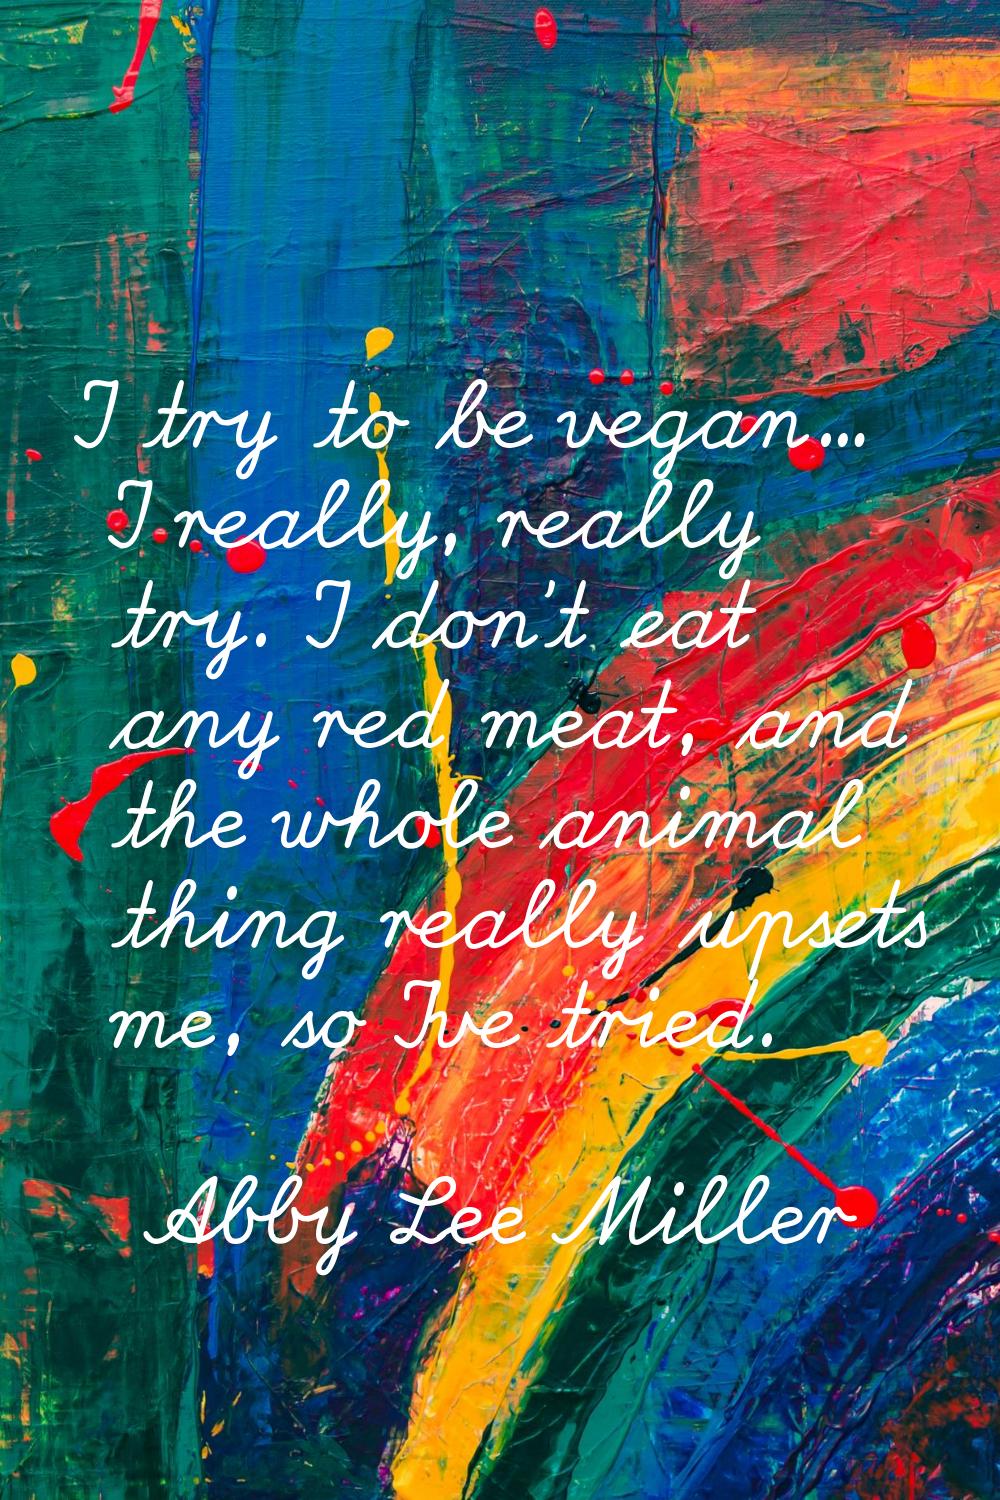 I try to be vegan... I really, really try. I don't eat any red meat, and the whole animal thing rea